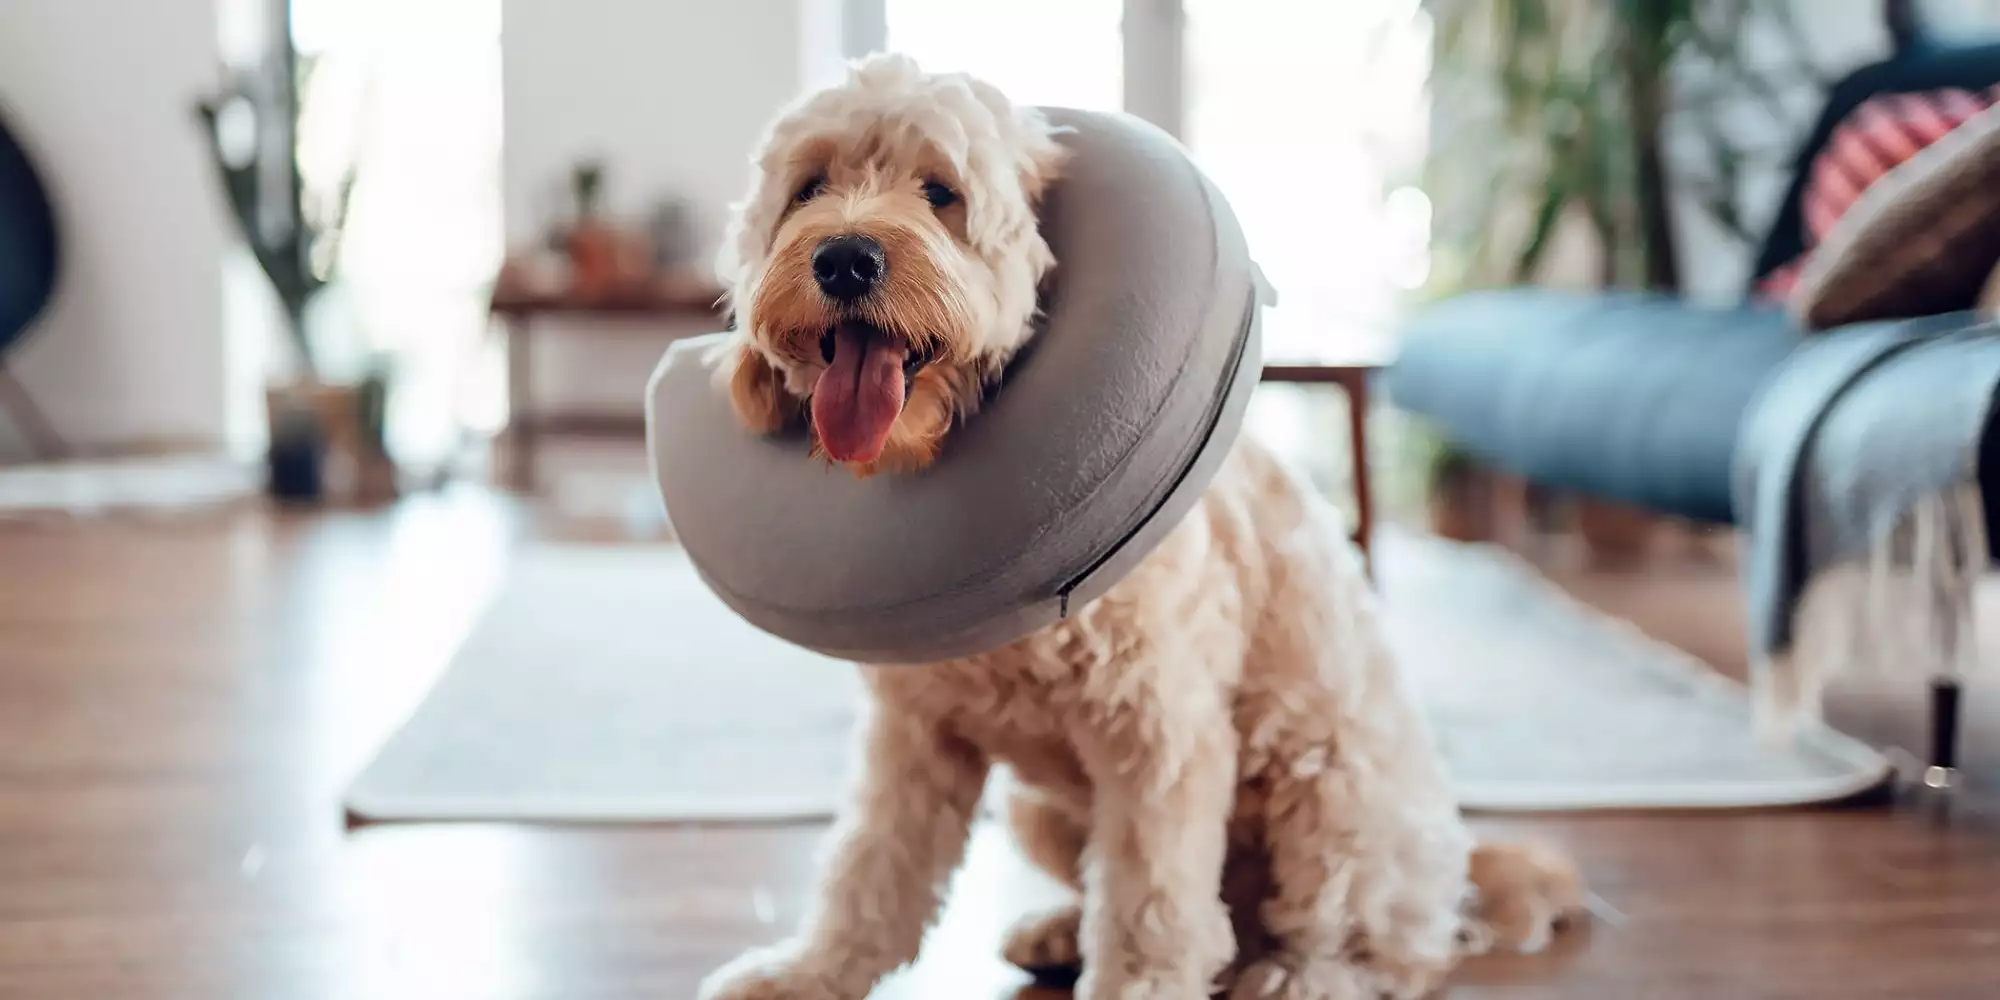 How long after getting spayed can my dog play?